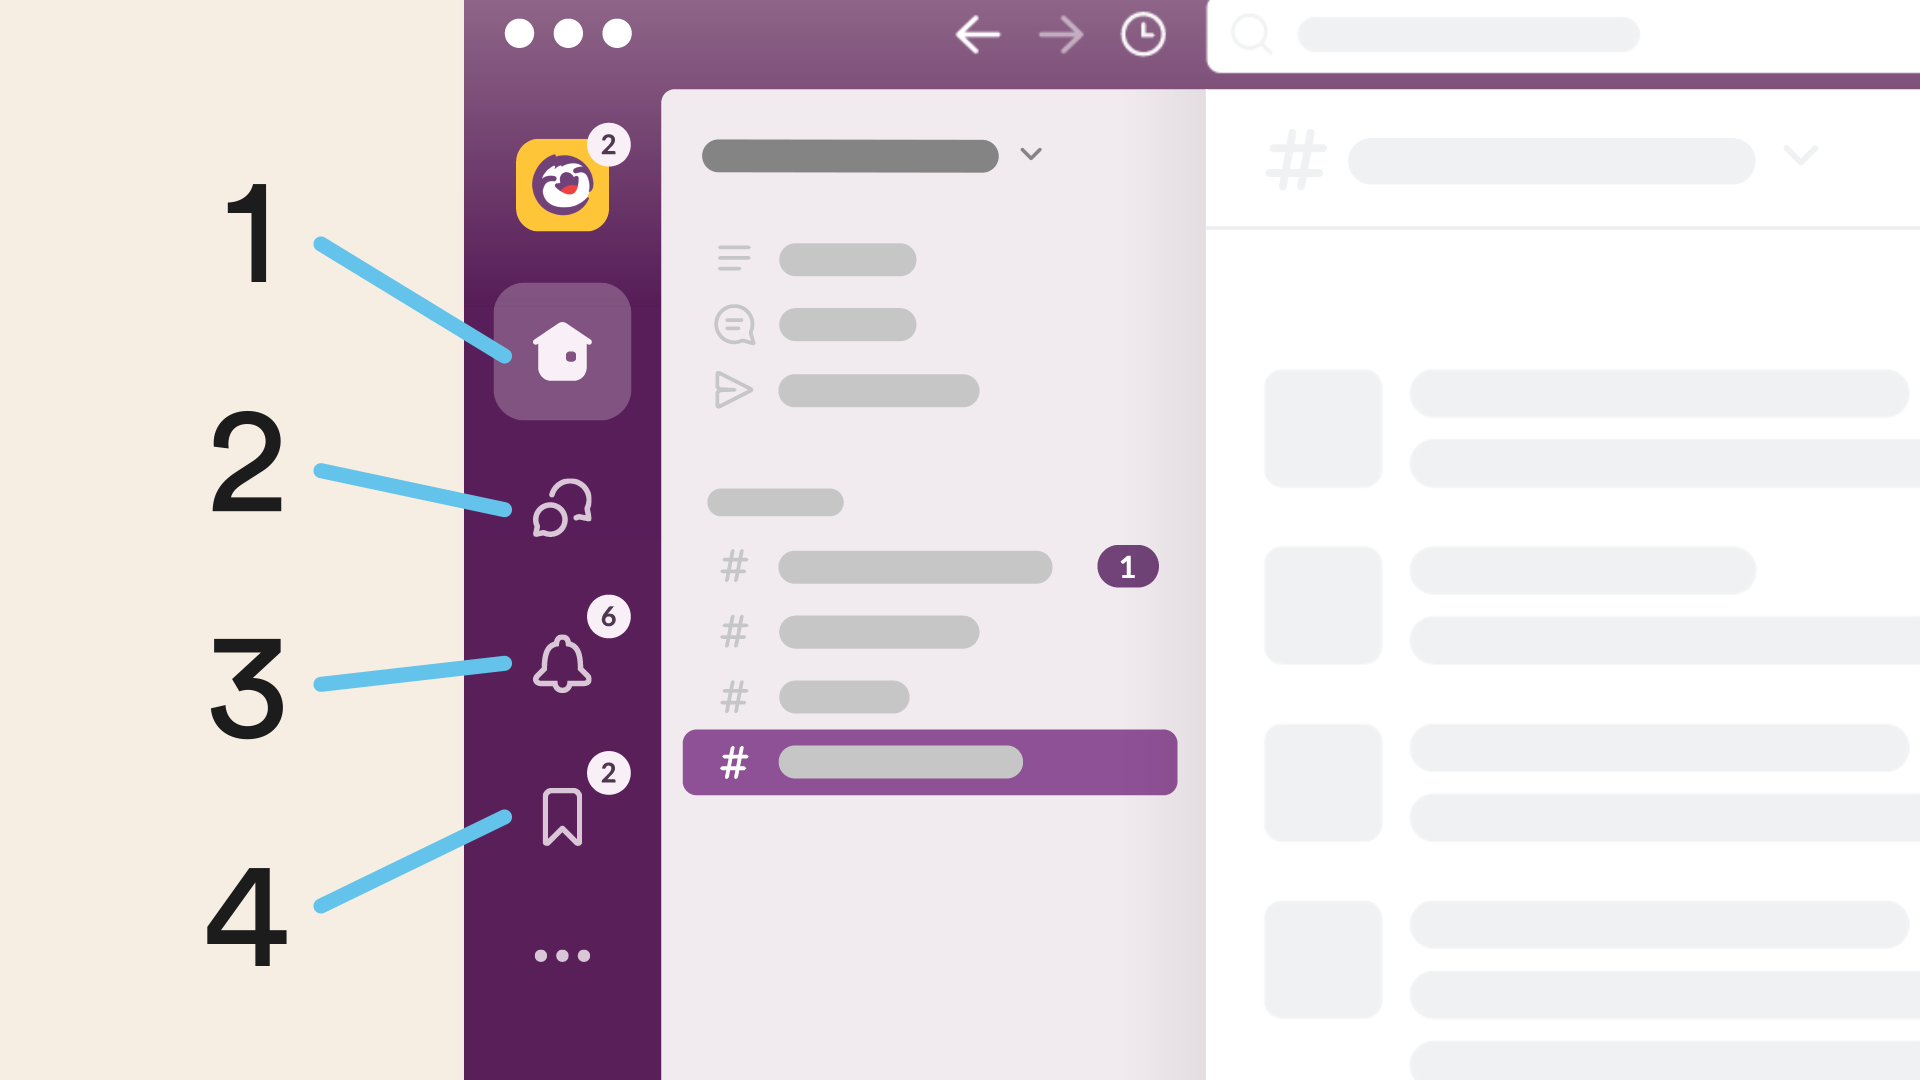 View of the sidebar in Slack